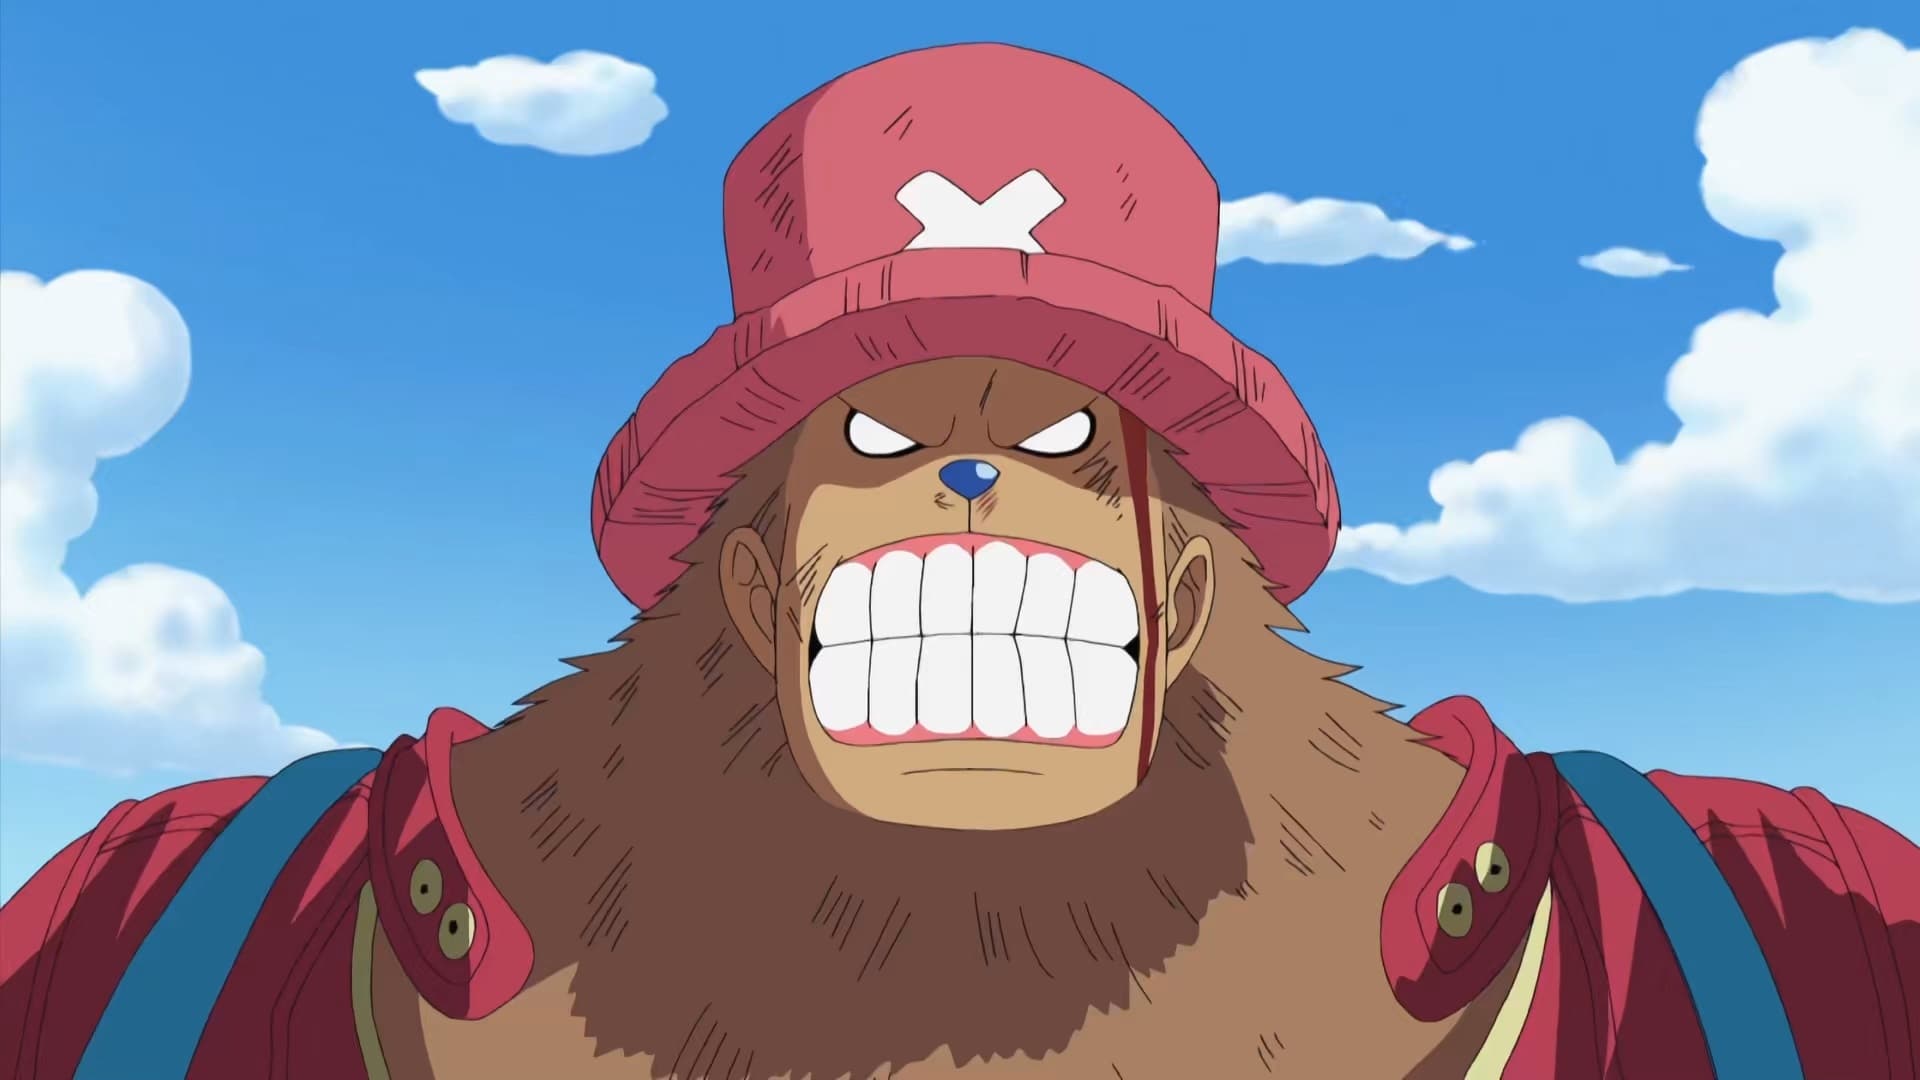 Never Watched One Piece — 290-93: Uncontrollable! Chopper's Forbidden